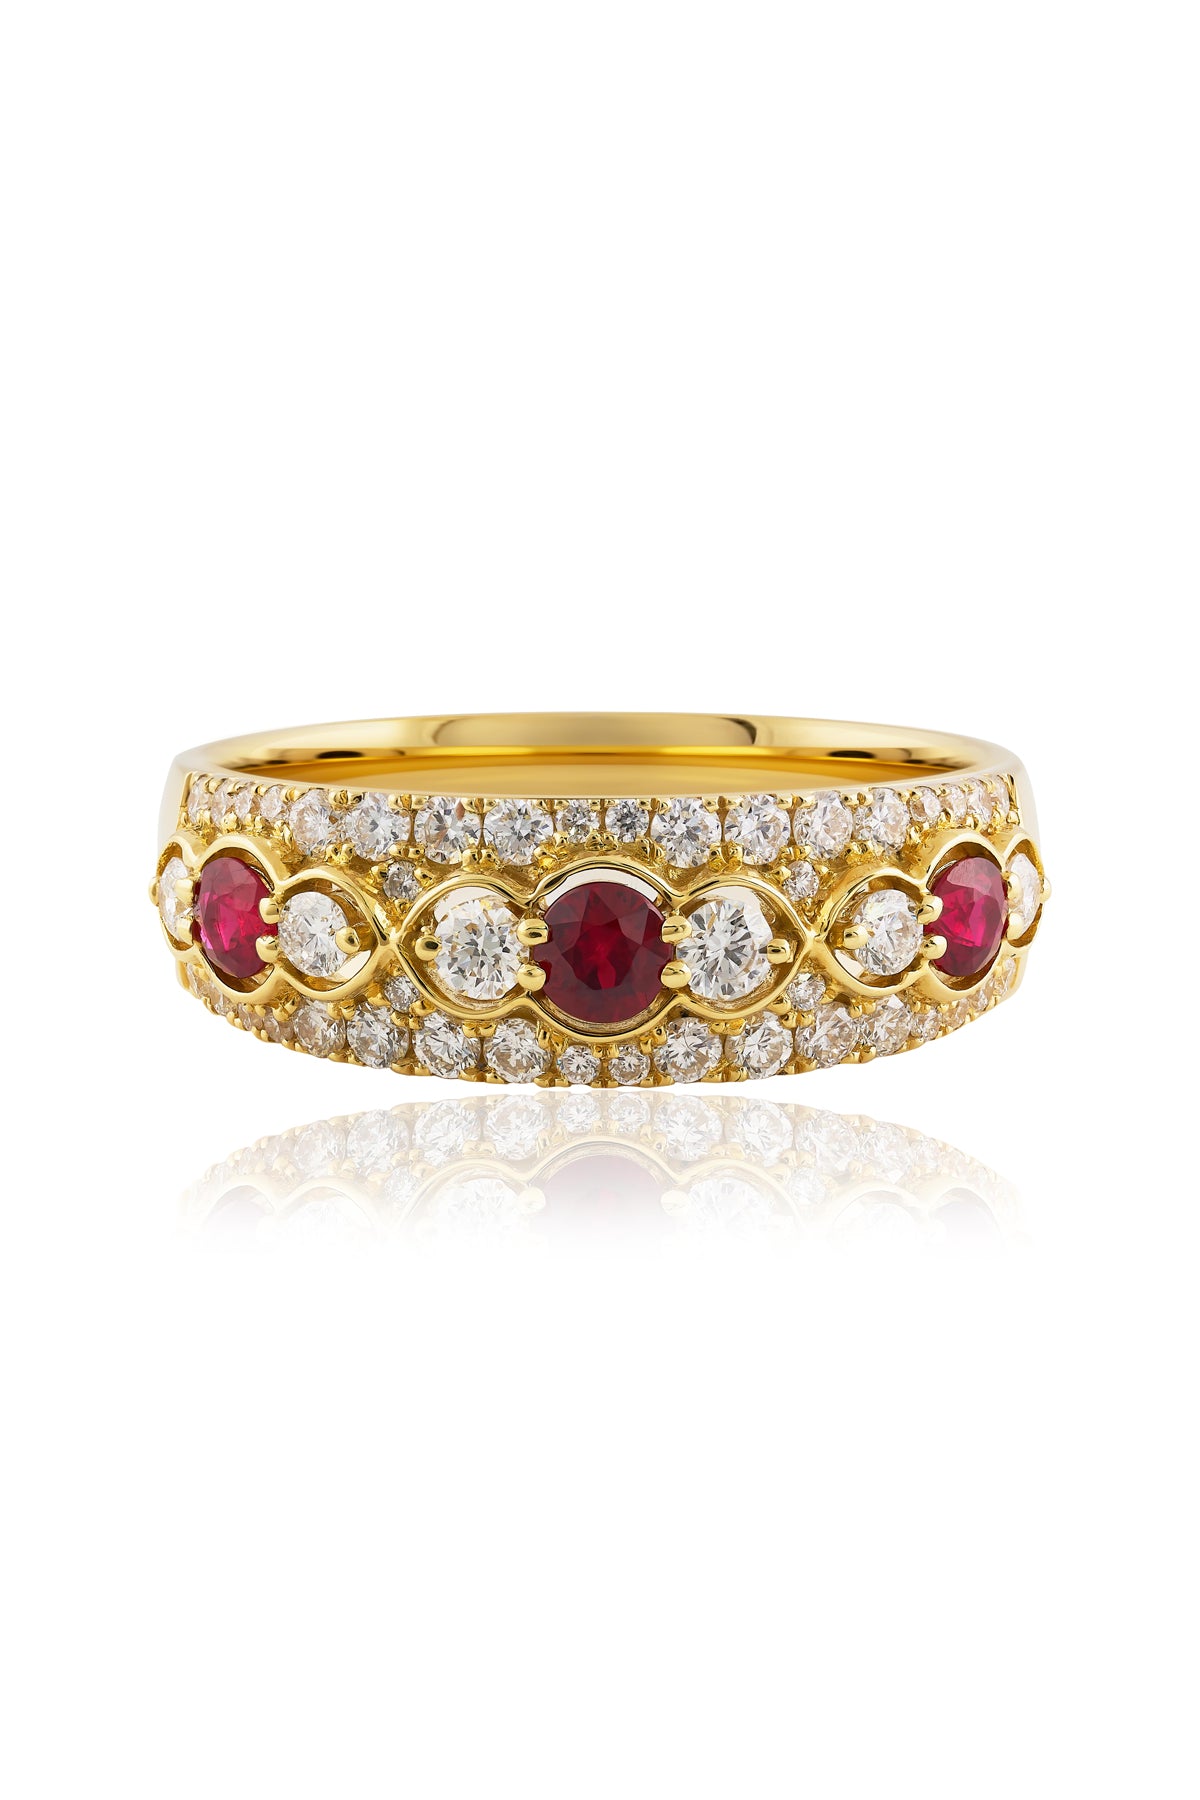 Ruby And Diamond Dress Ring Set In Luxurious 18 Carat Yellow Gold from LeGassick Jewellery.